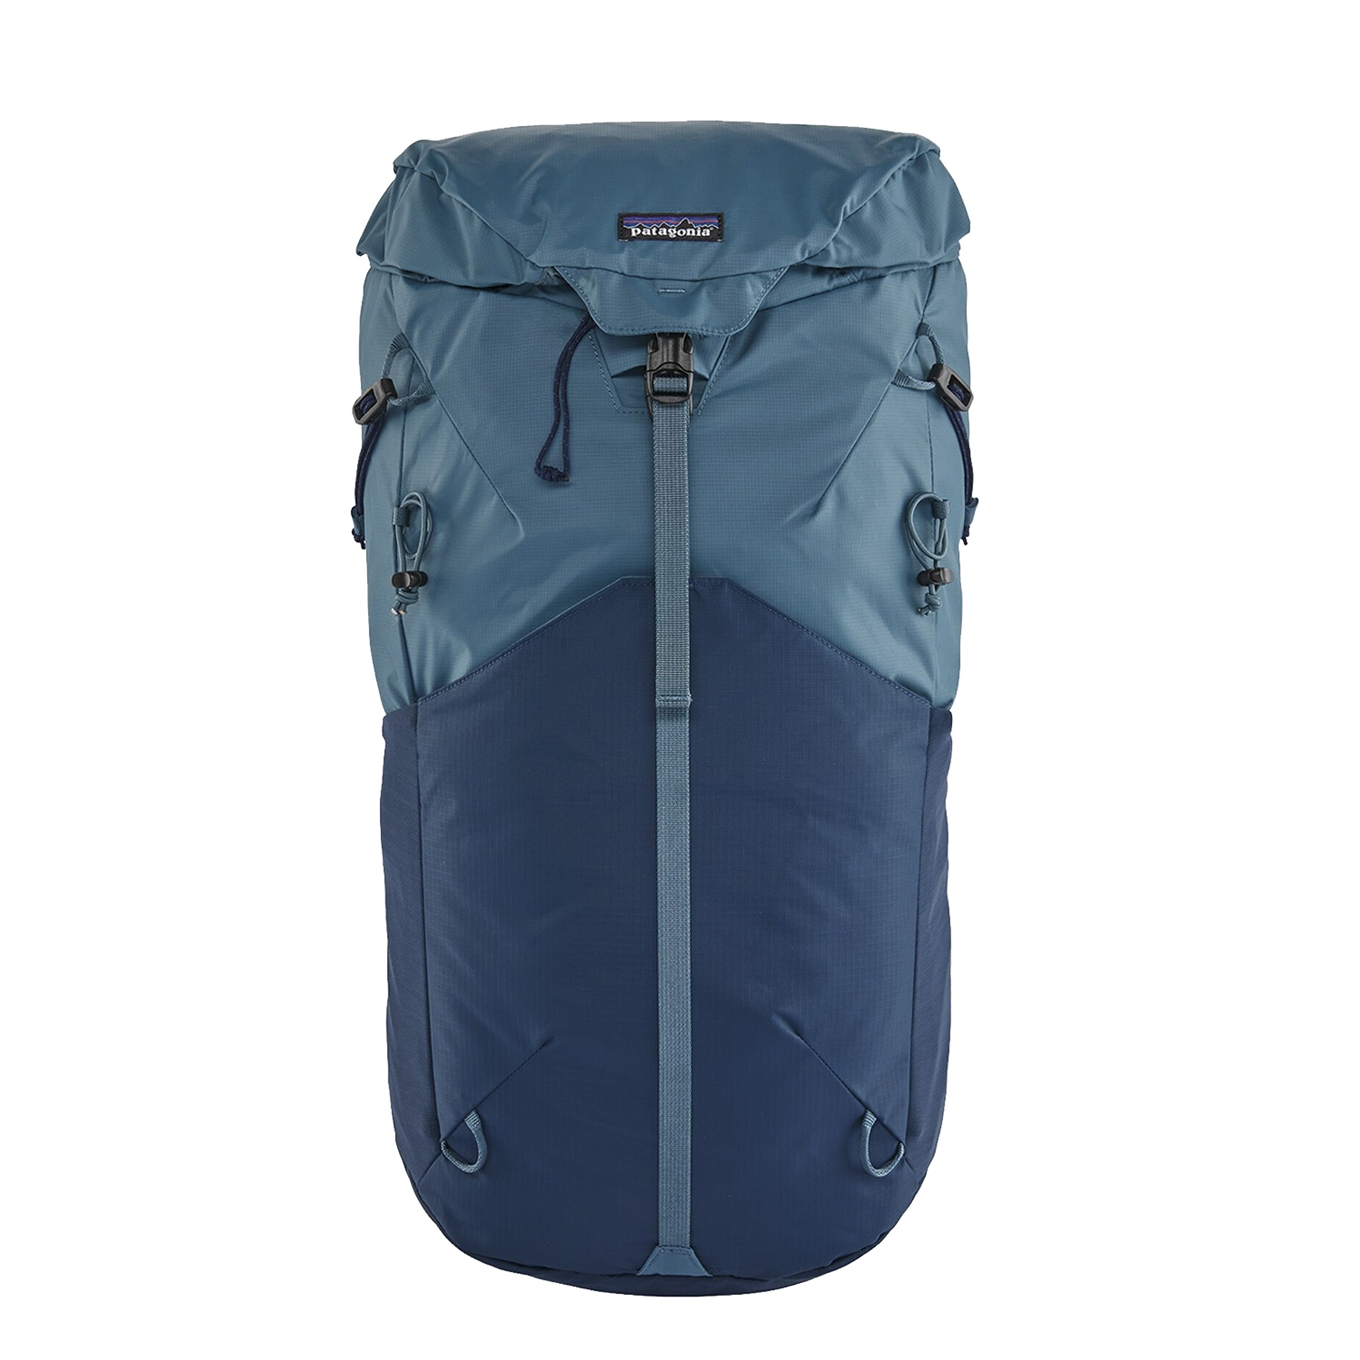 Patagonia Altvia Pack 28L S abalone blue backpack